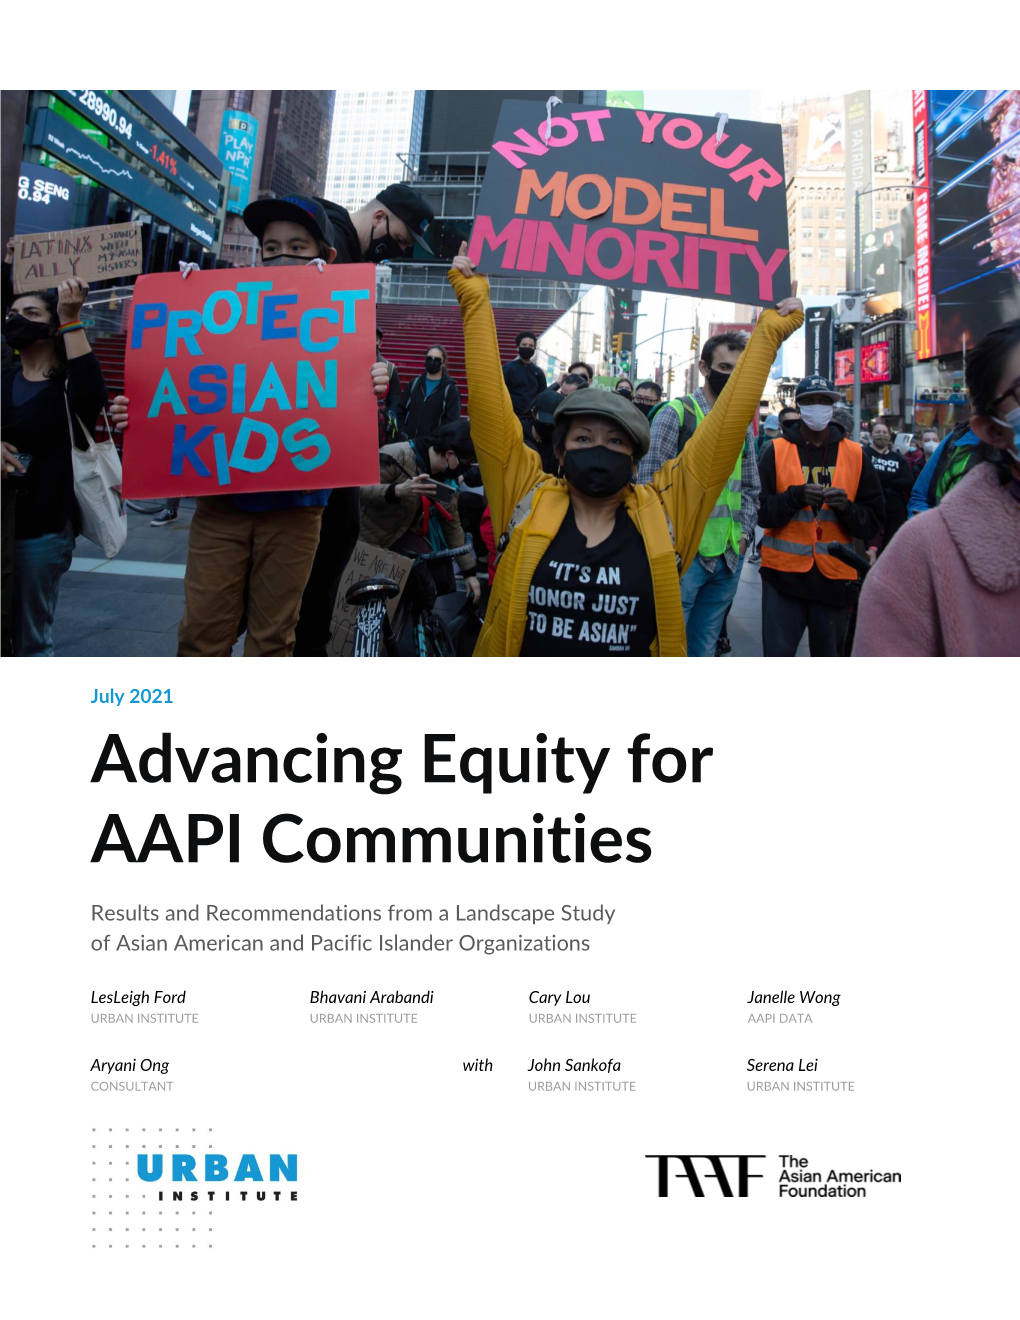 Advancing Equity for AAPI Communities